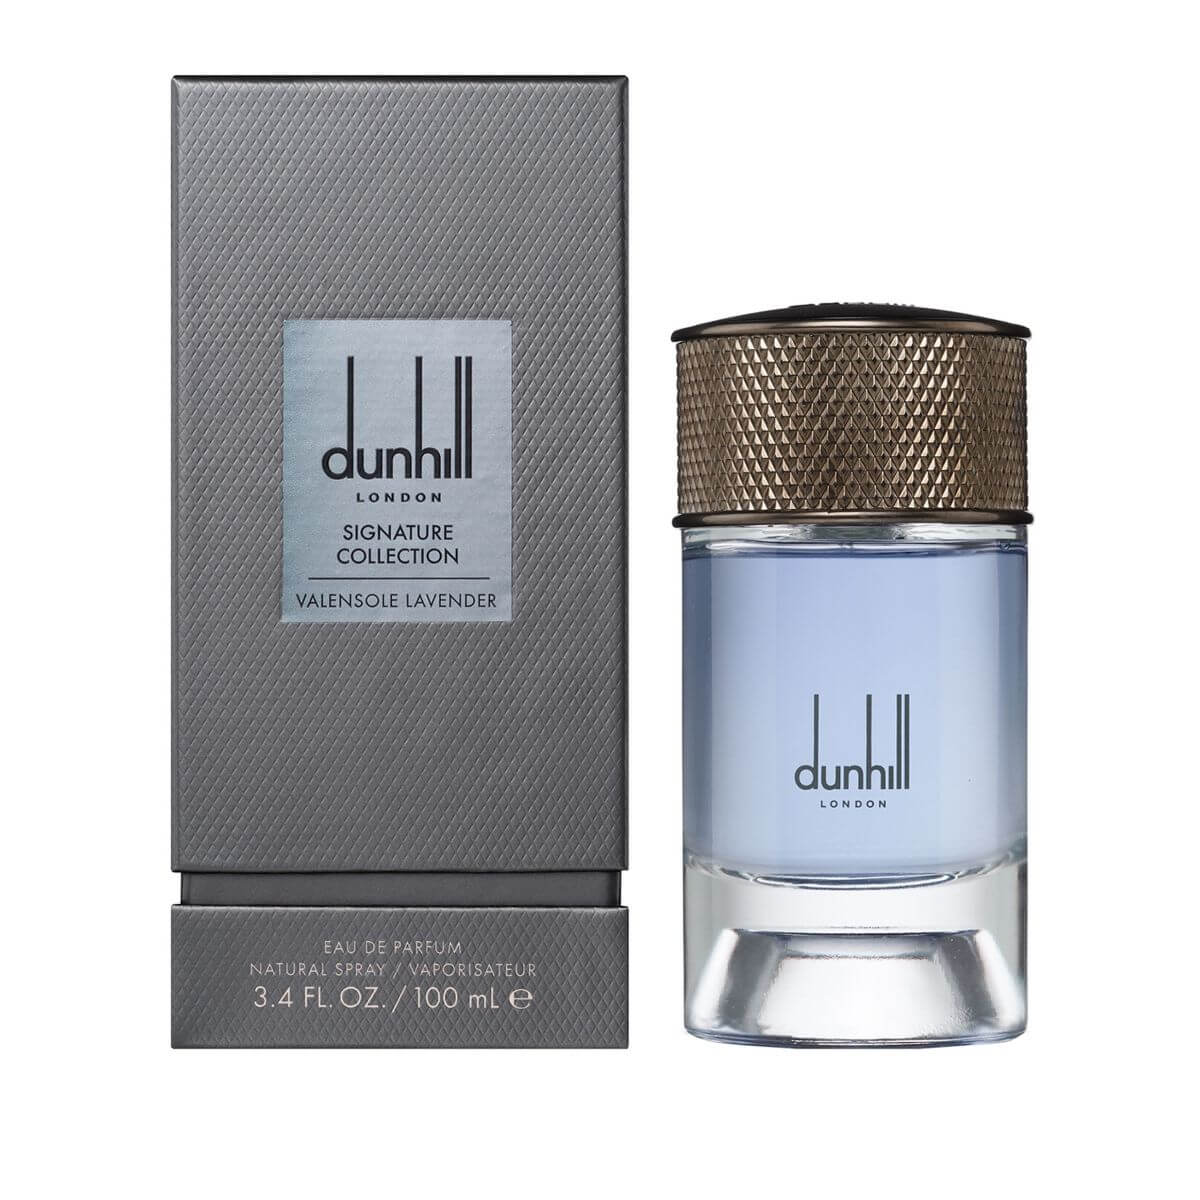 Dunhill Signature Collection 2020 Valensole Lavender 100Ml